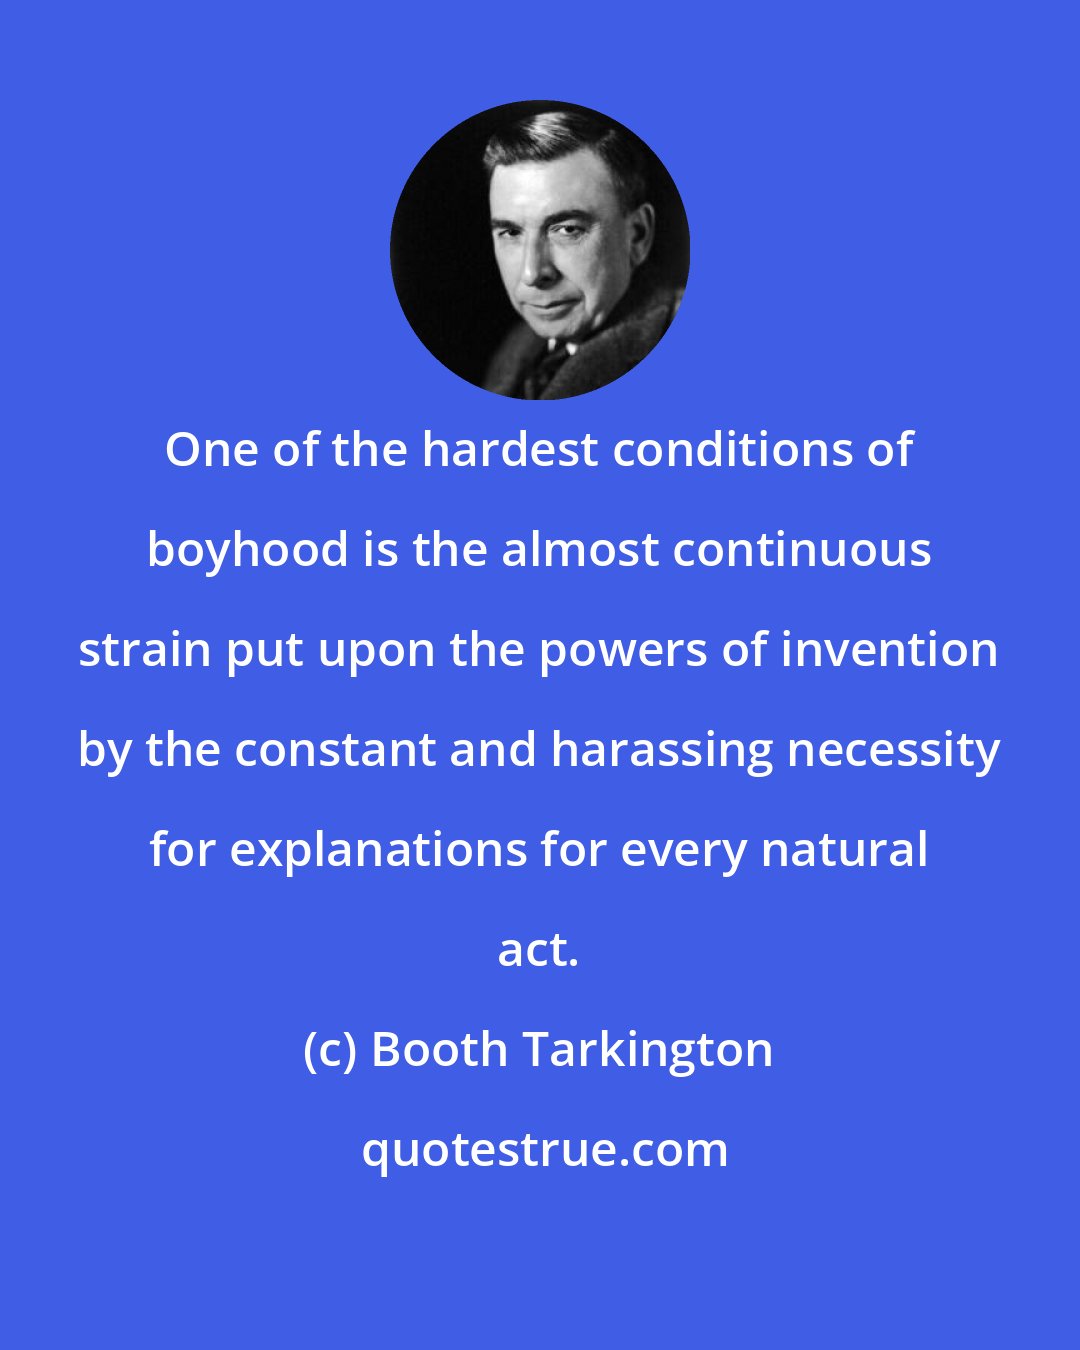 Booth Tarkington: One of the hardest conditions of boyhood is the almost continuous strain put upon the powers of invention by the constant and harassing necessity for explanations for every natural act.